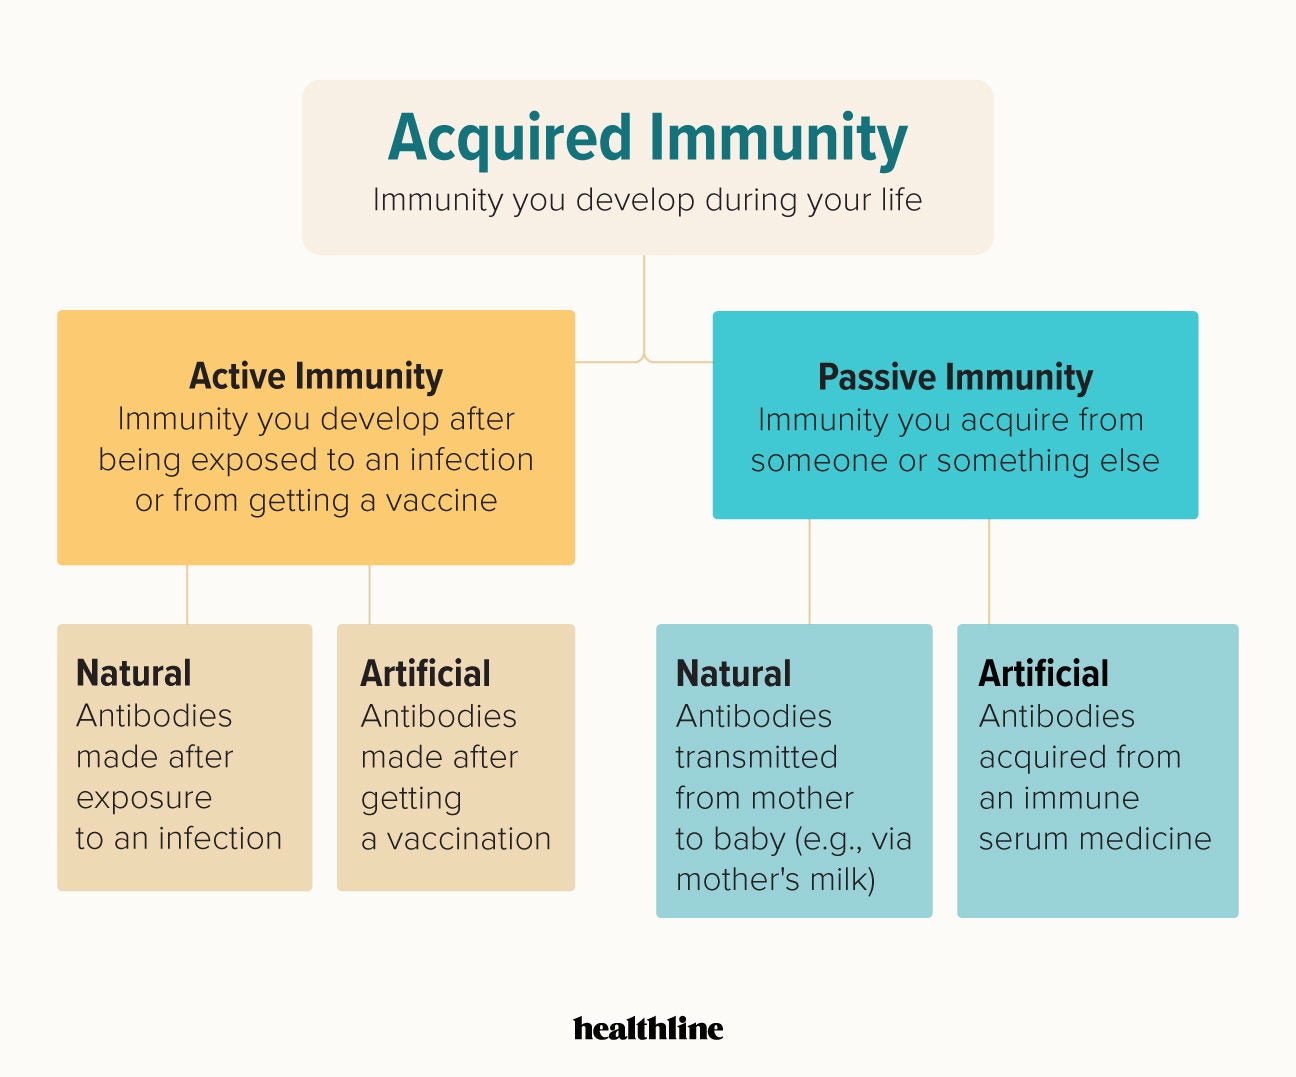 Is active immunity life long?